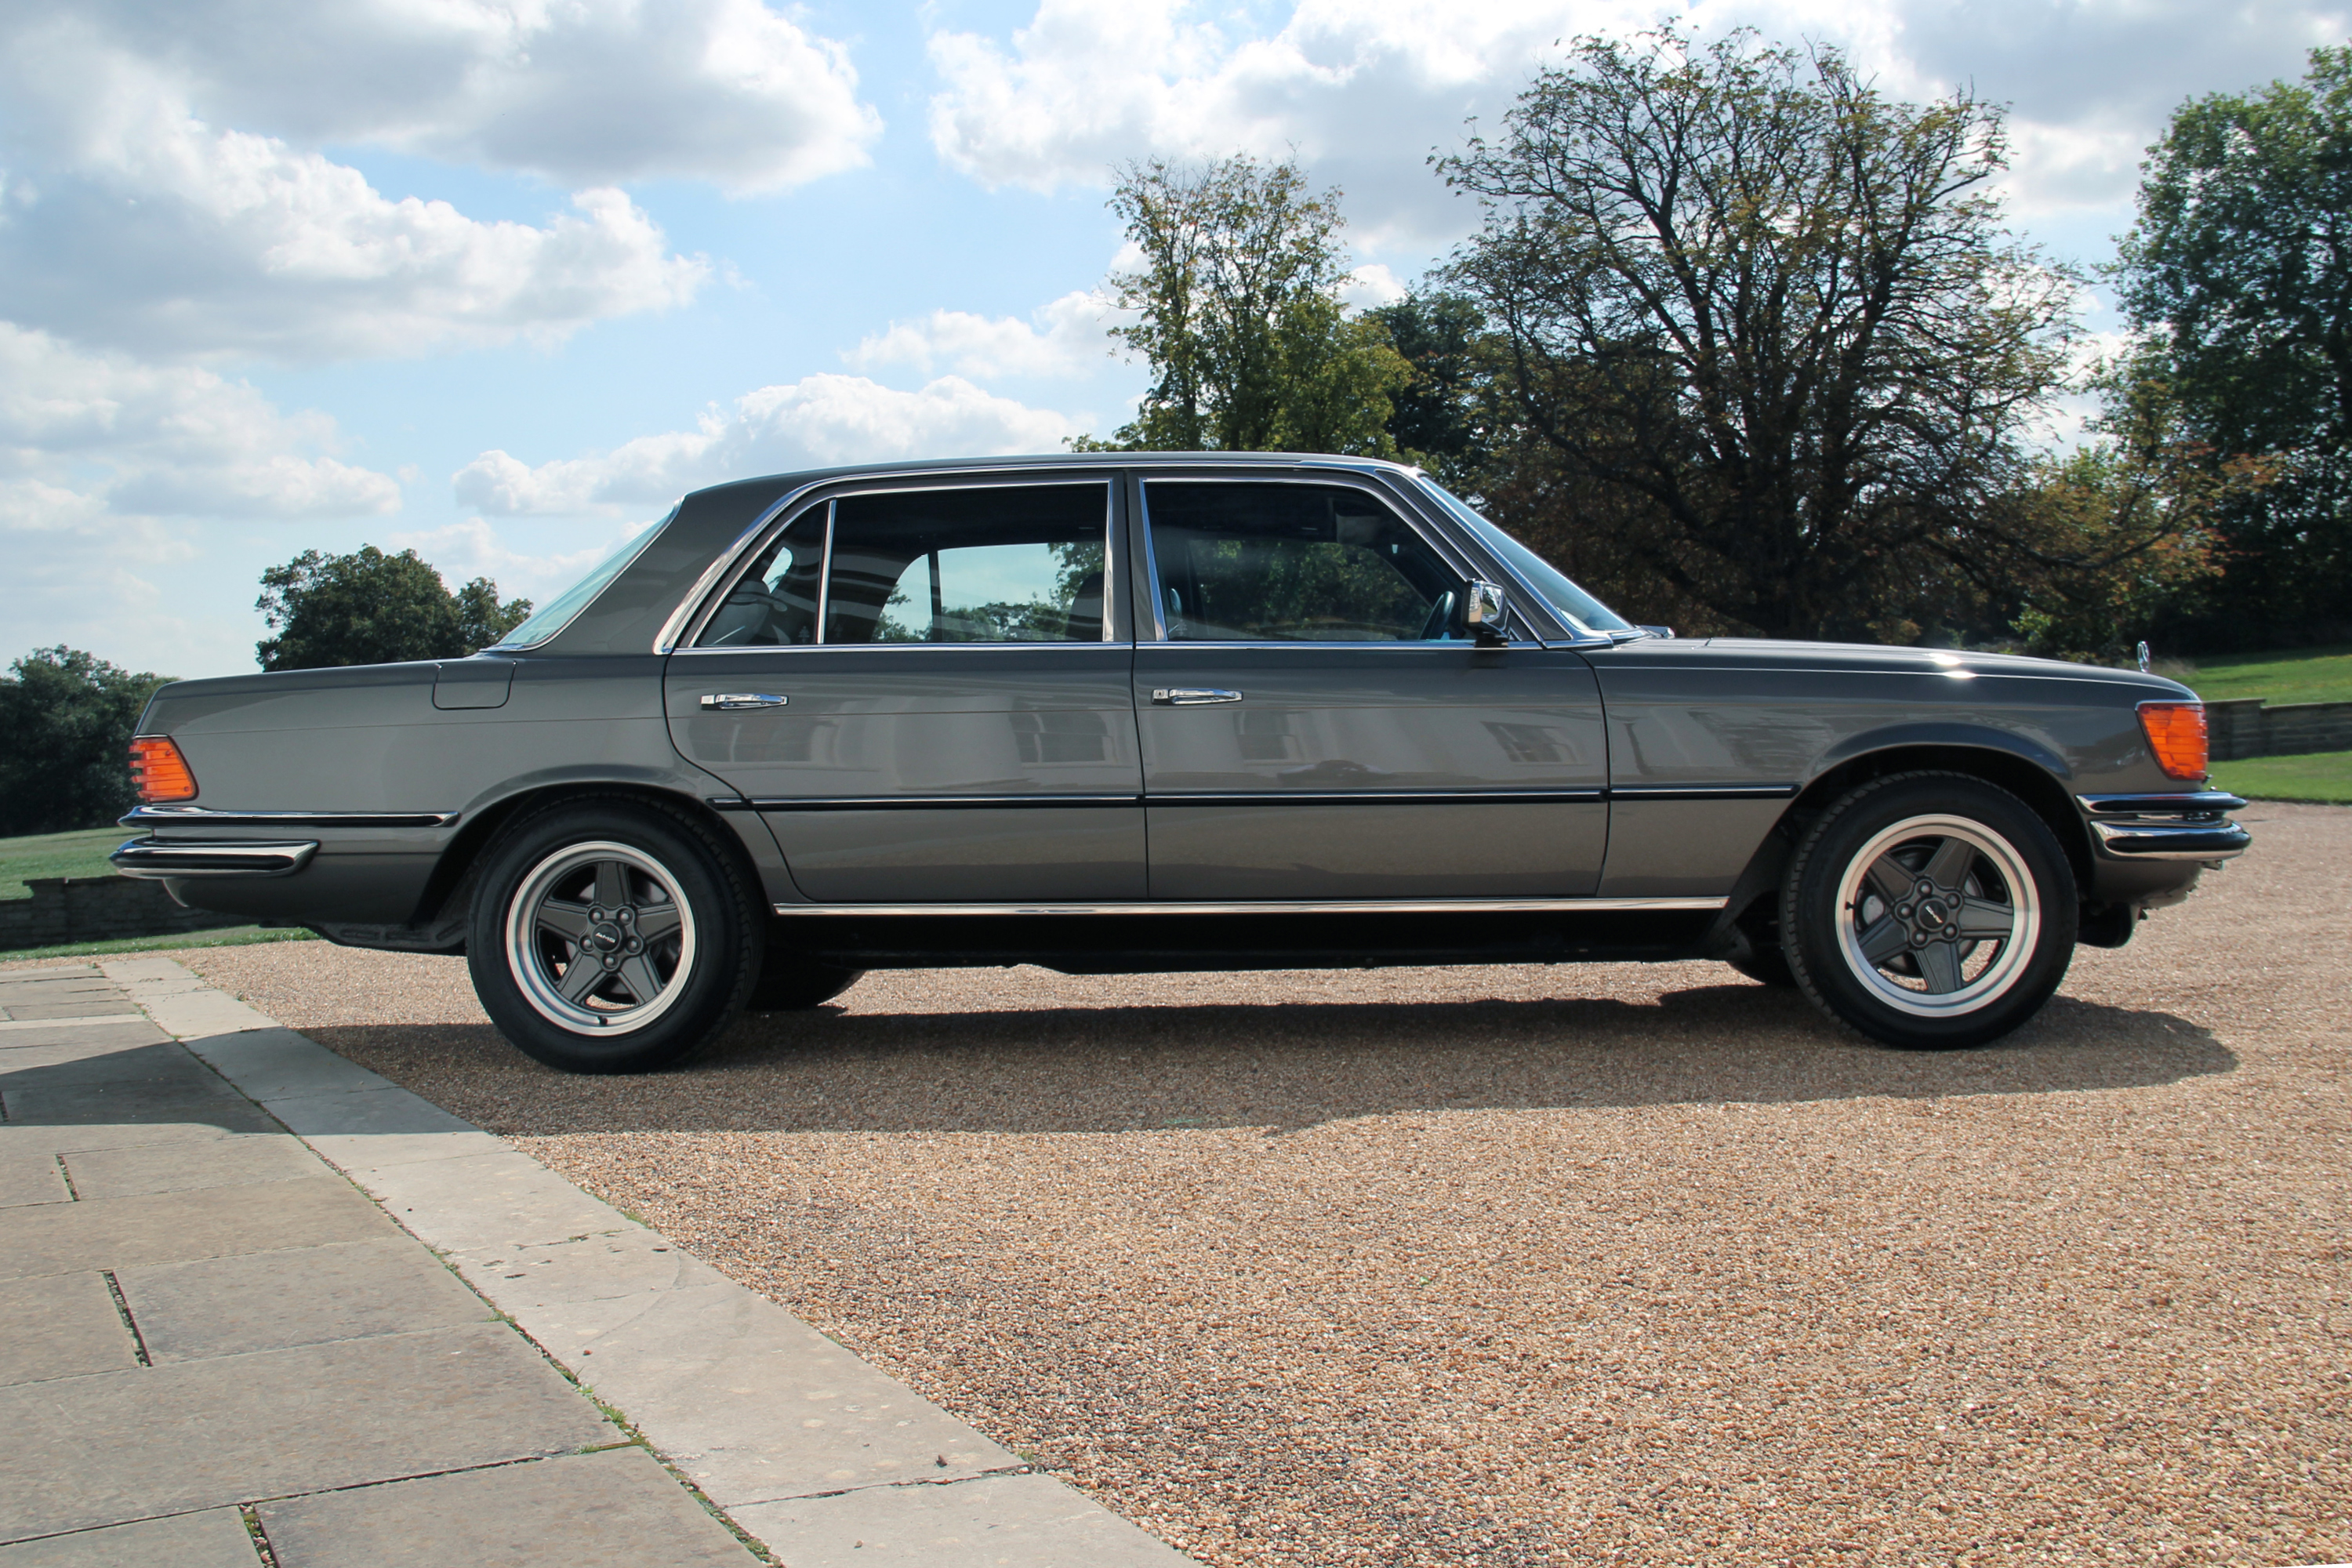 Used 1980 Mercedes Benz 450sel 6 9 Saloon Saloon 6 9 Automatic Petrol For Sale In Essex U84 Lux Classics